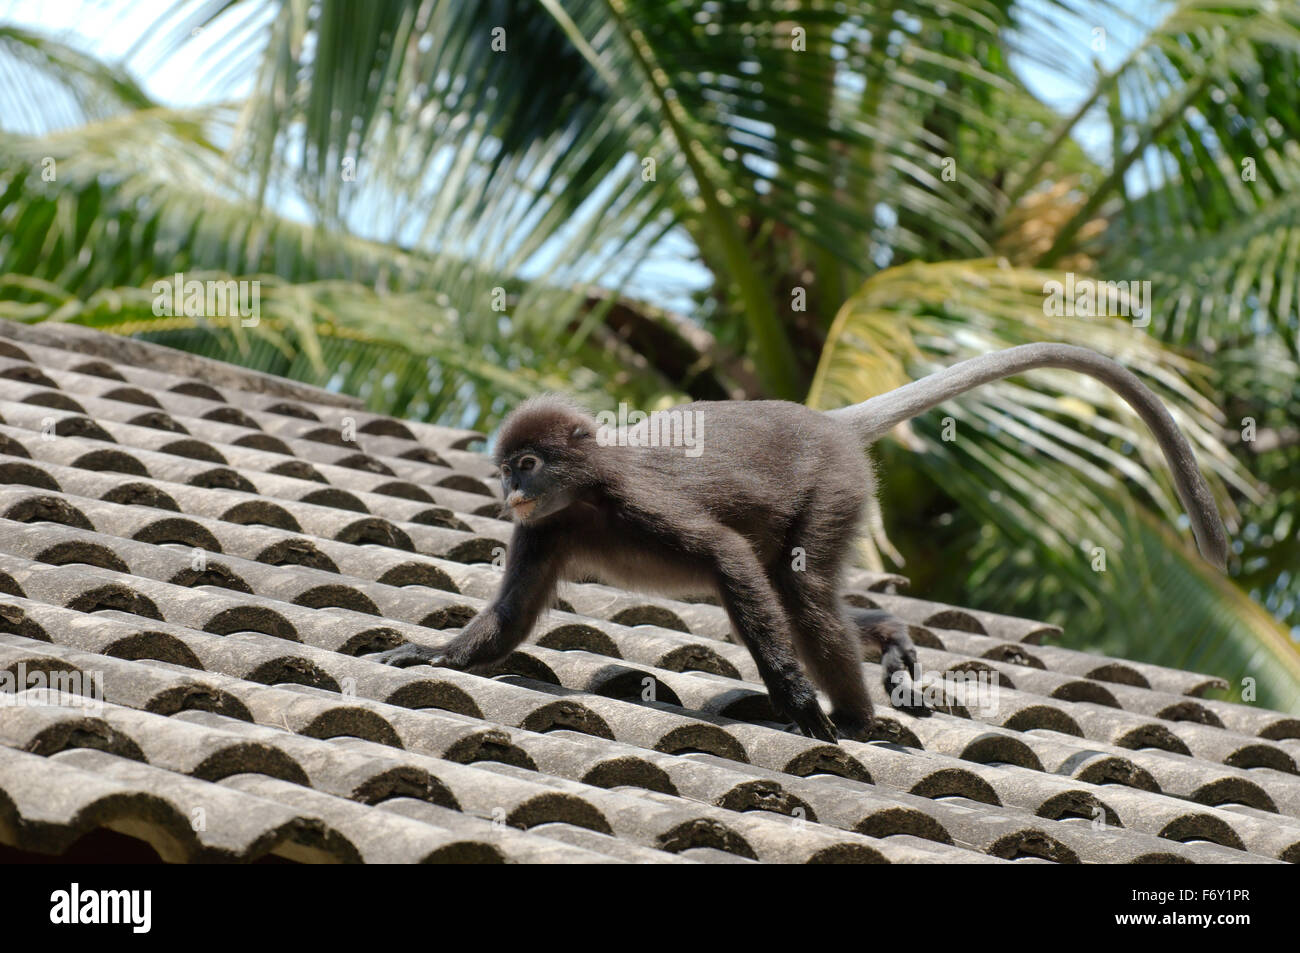 dusky leaf monkey, spectacled langur, or spectacled leaf monkey (Trachypithecus obscurus) walking on tiled roof,  Perhentian isl Stock Photo